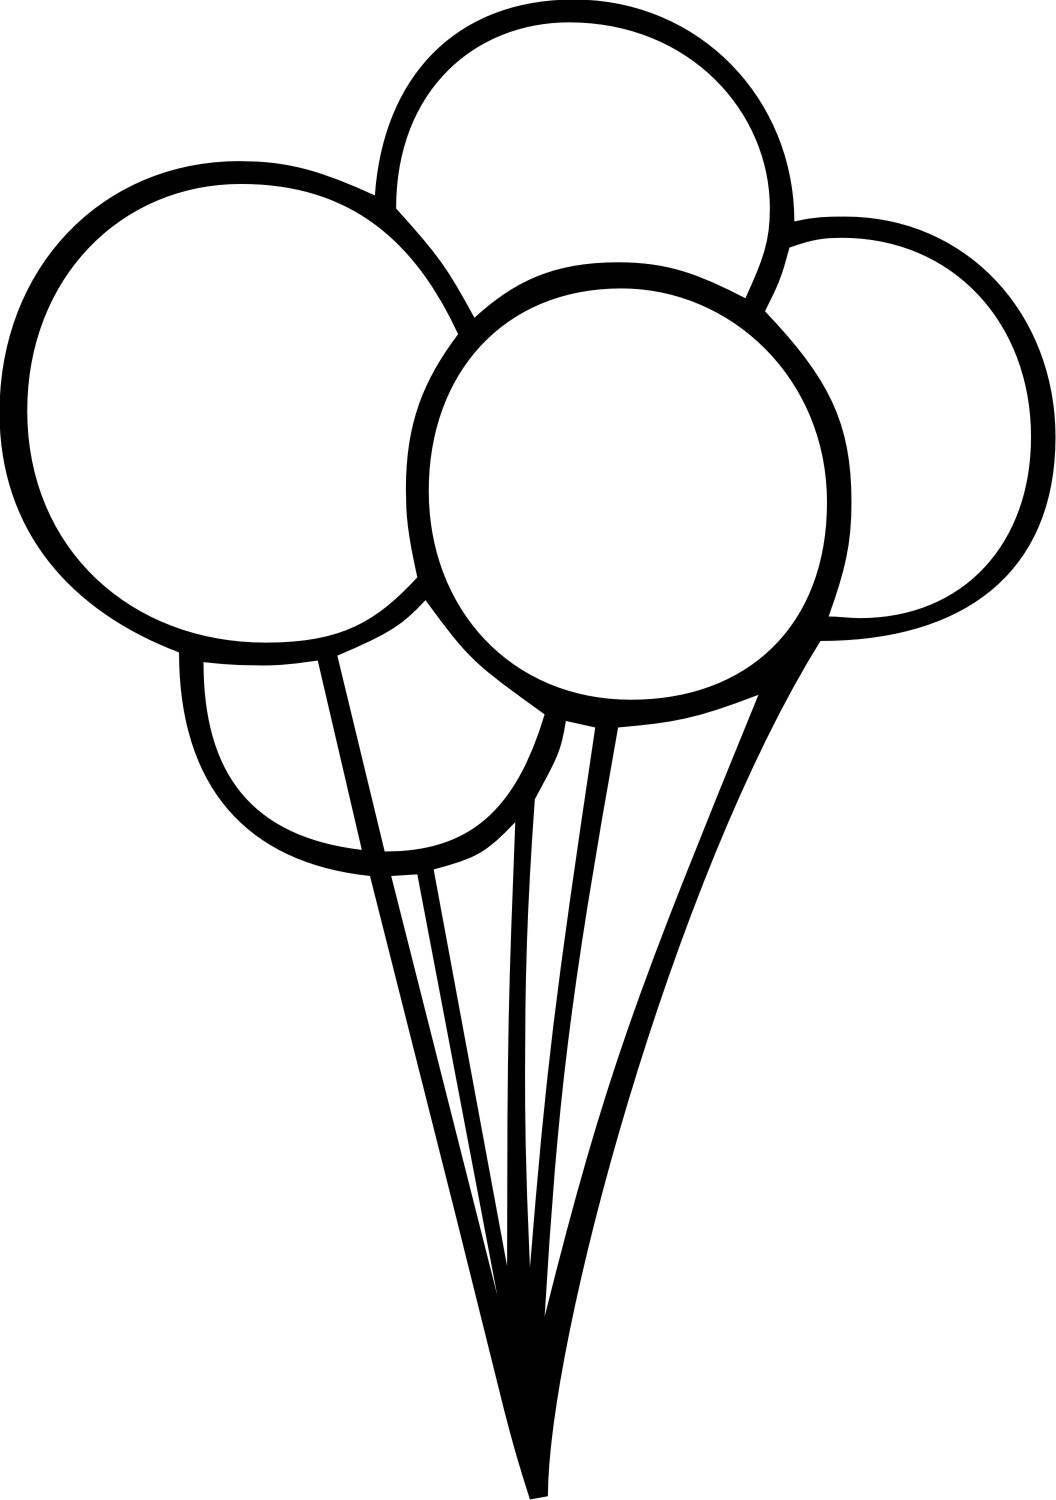 Balloon Black And White Clipart | Free download on ClipArtMag